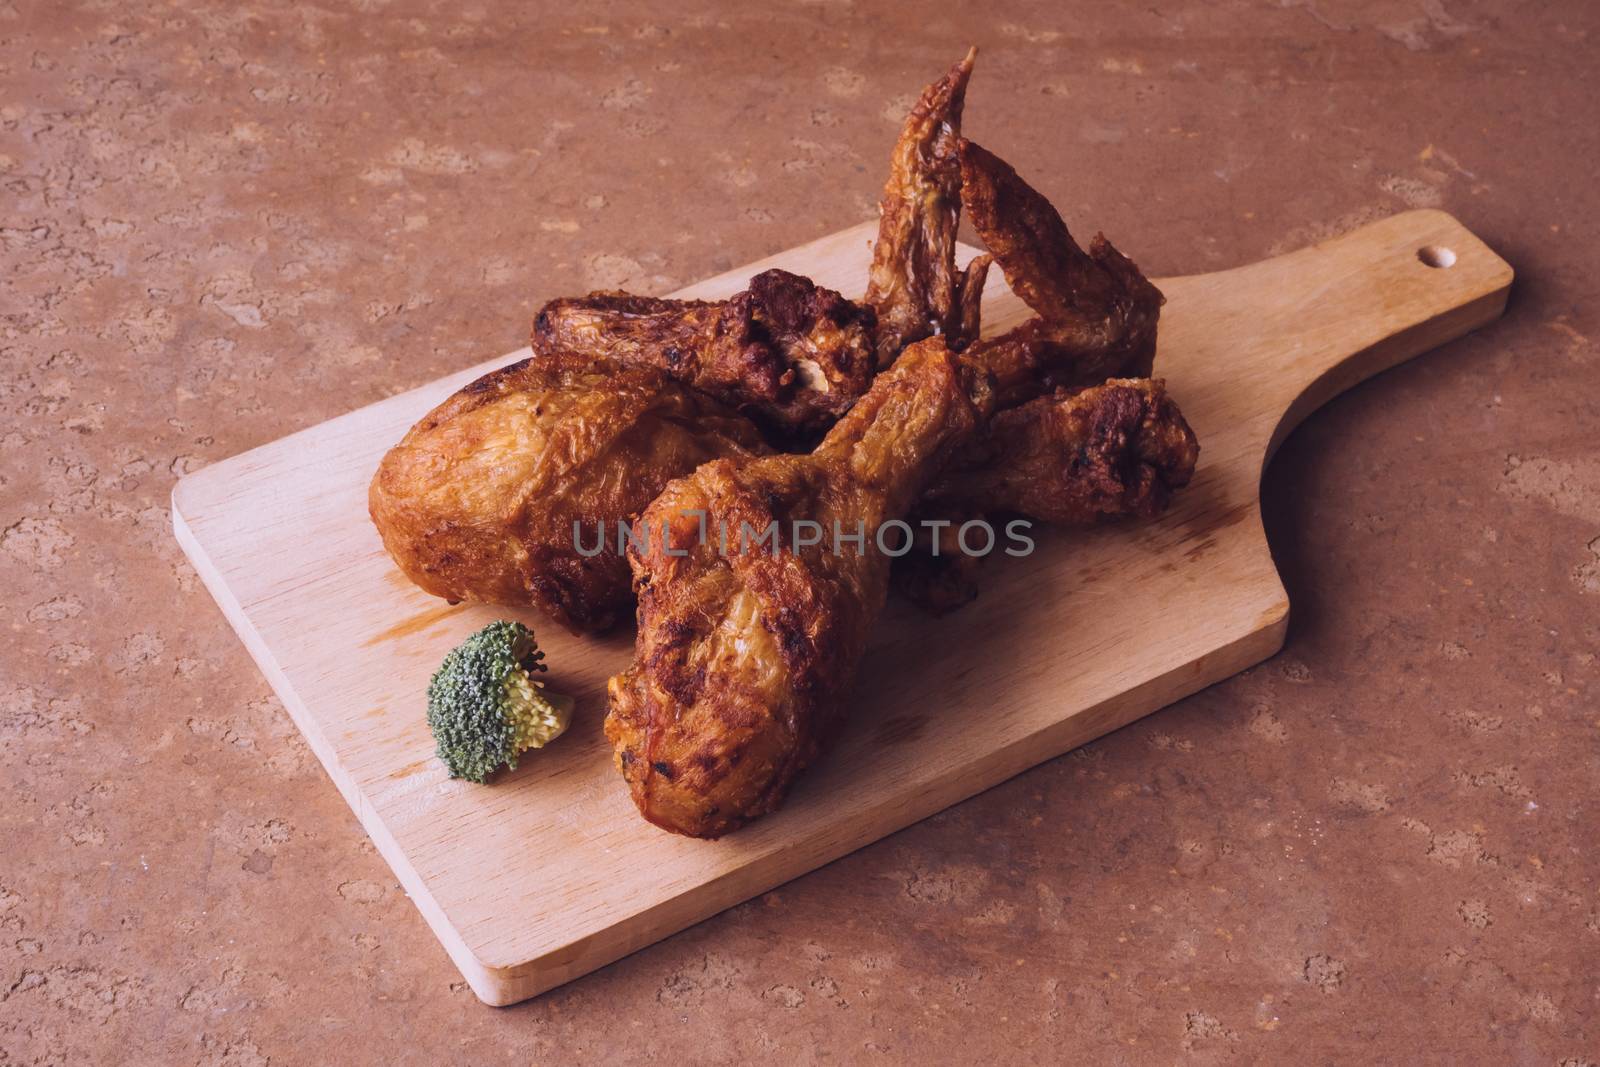 Fried chicken legs and wings on wooden tray.